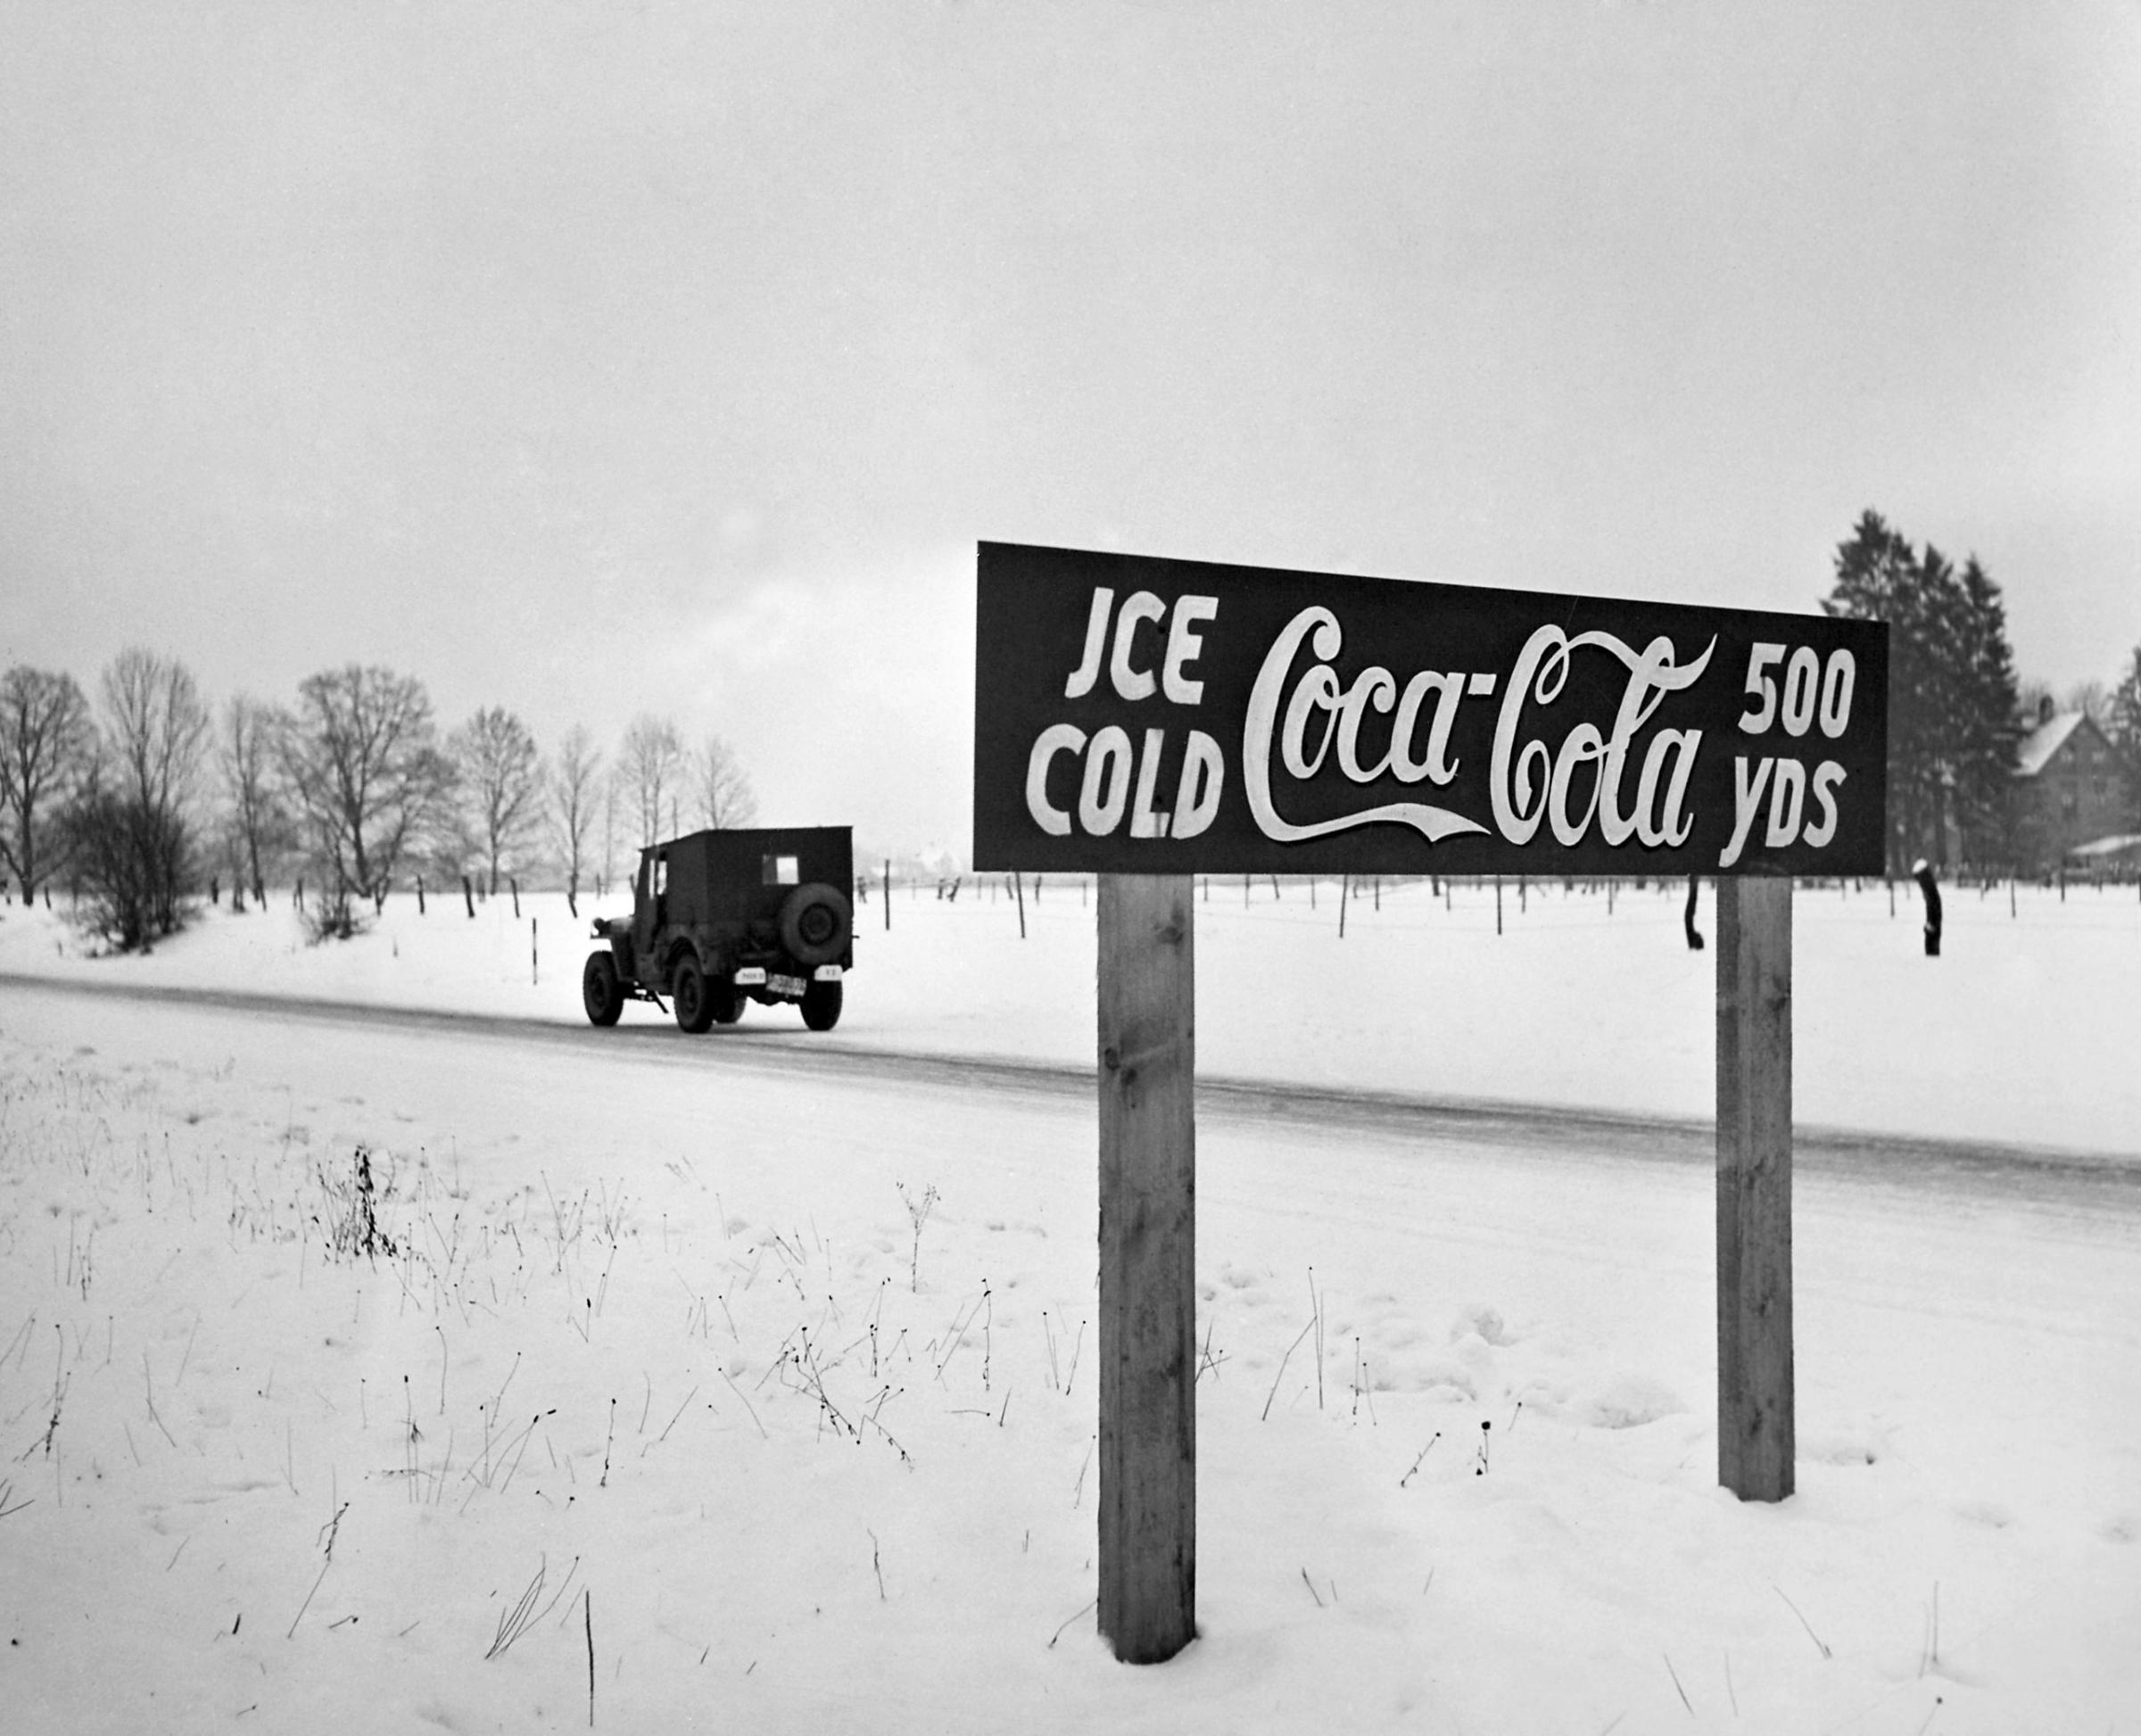 A Coca-Cola road sign beckons on the Autobahn between Munich and Salzberg, Germany, 1947.